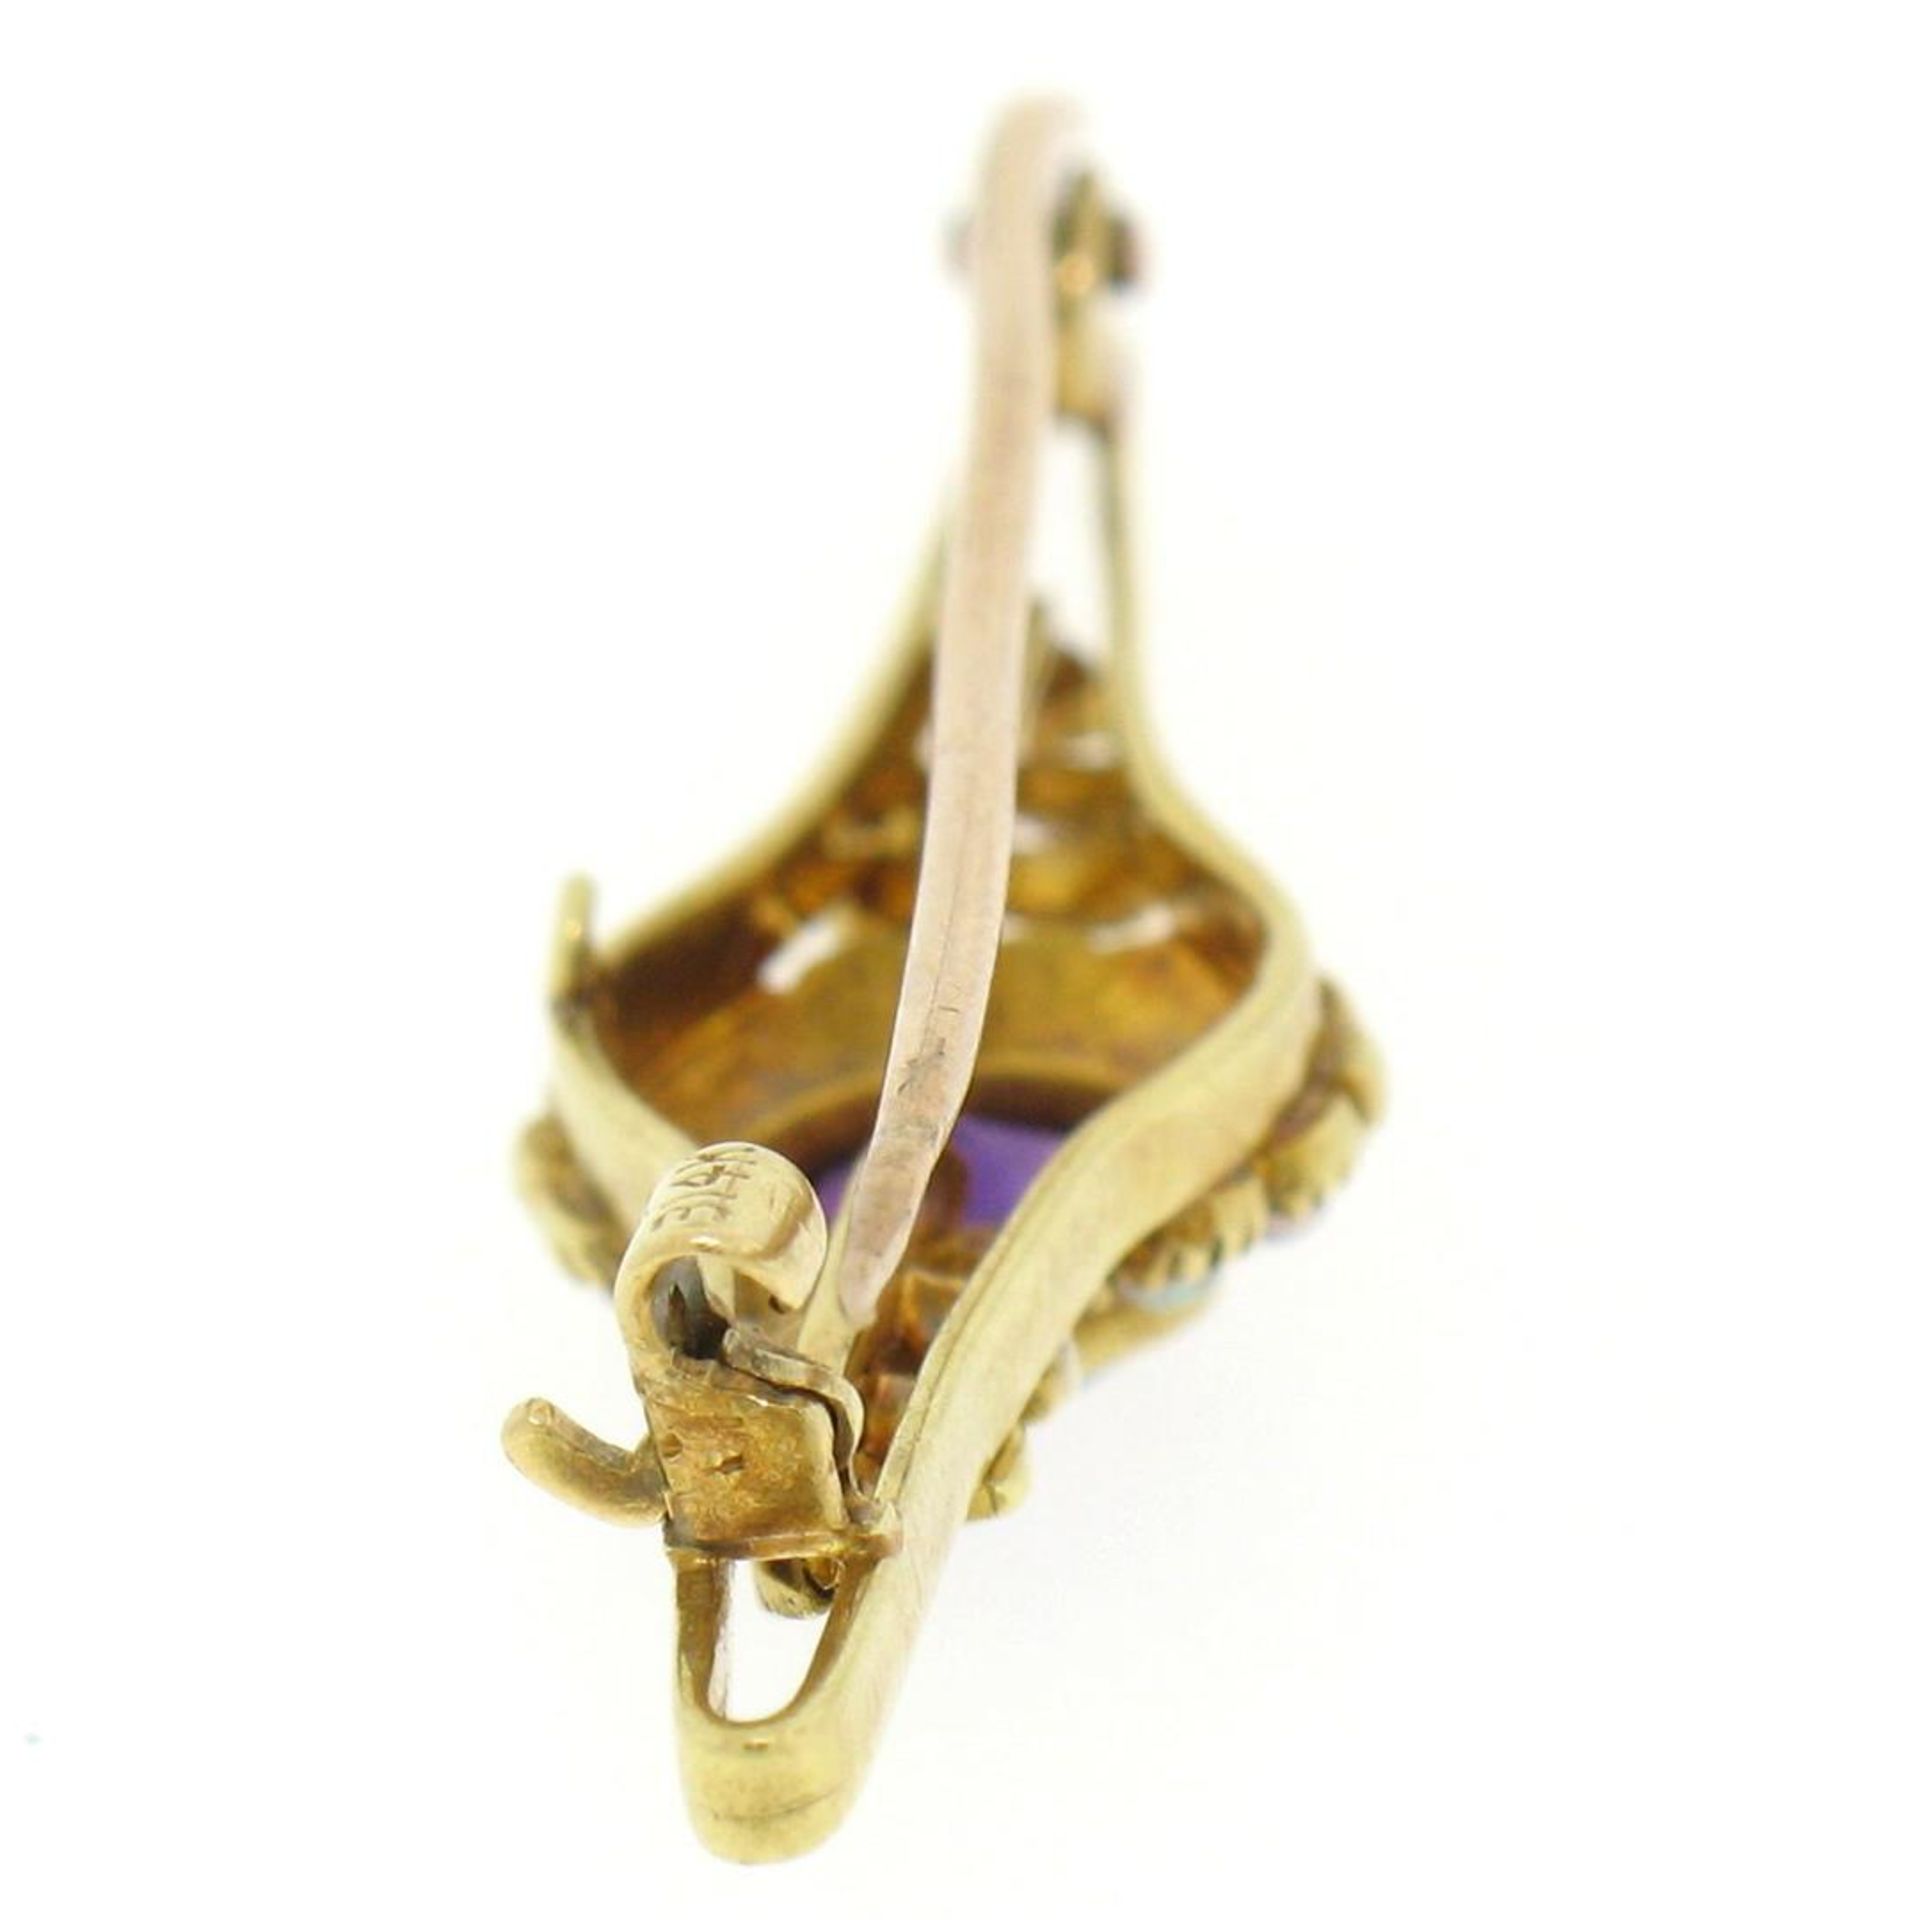 15k Yellow Gold .64 ct Old Cut Amethyst & Seed Pearl Brooch Pin - Image 5 of 8